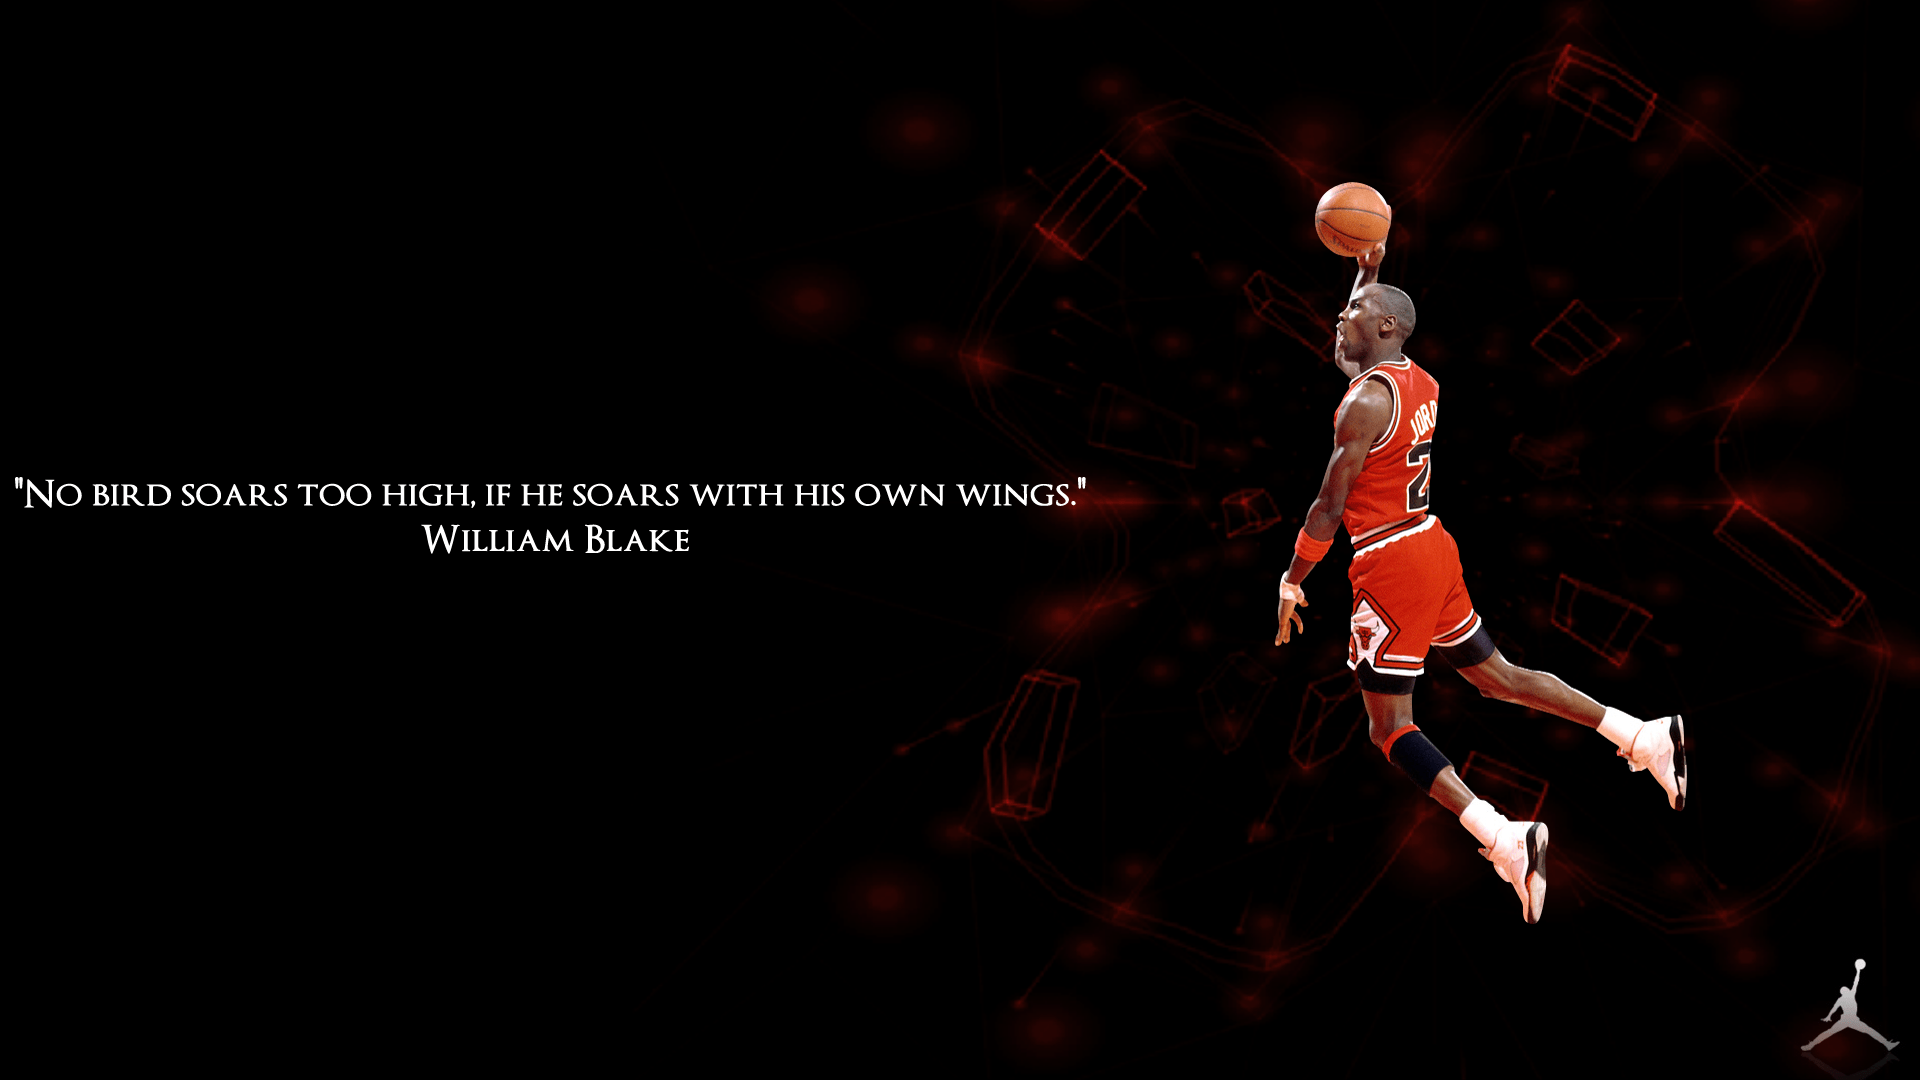 motivational sports wallpapers